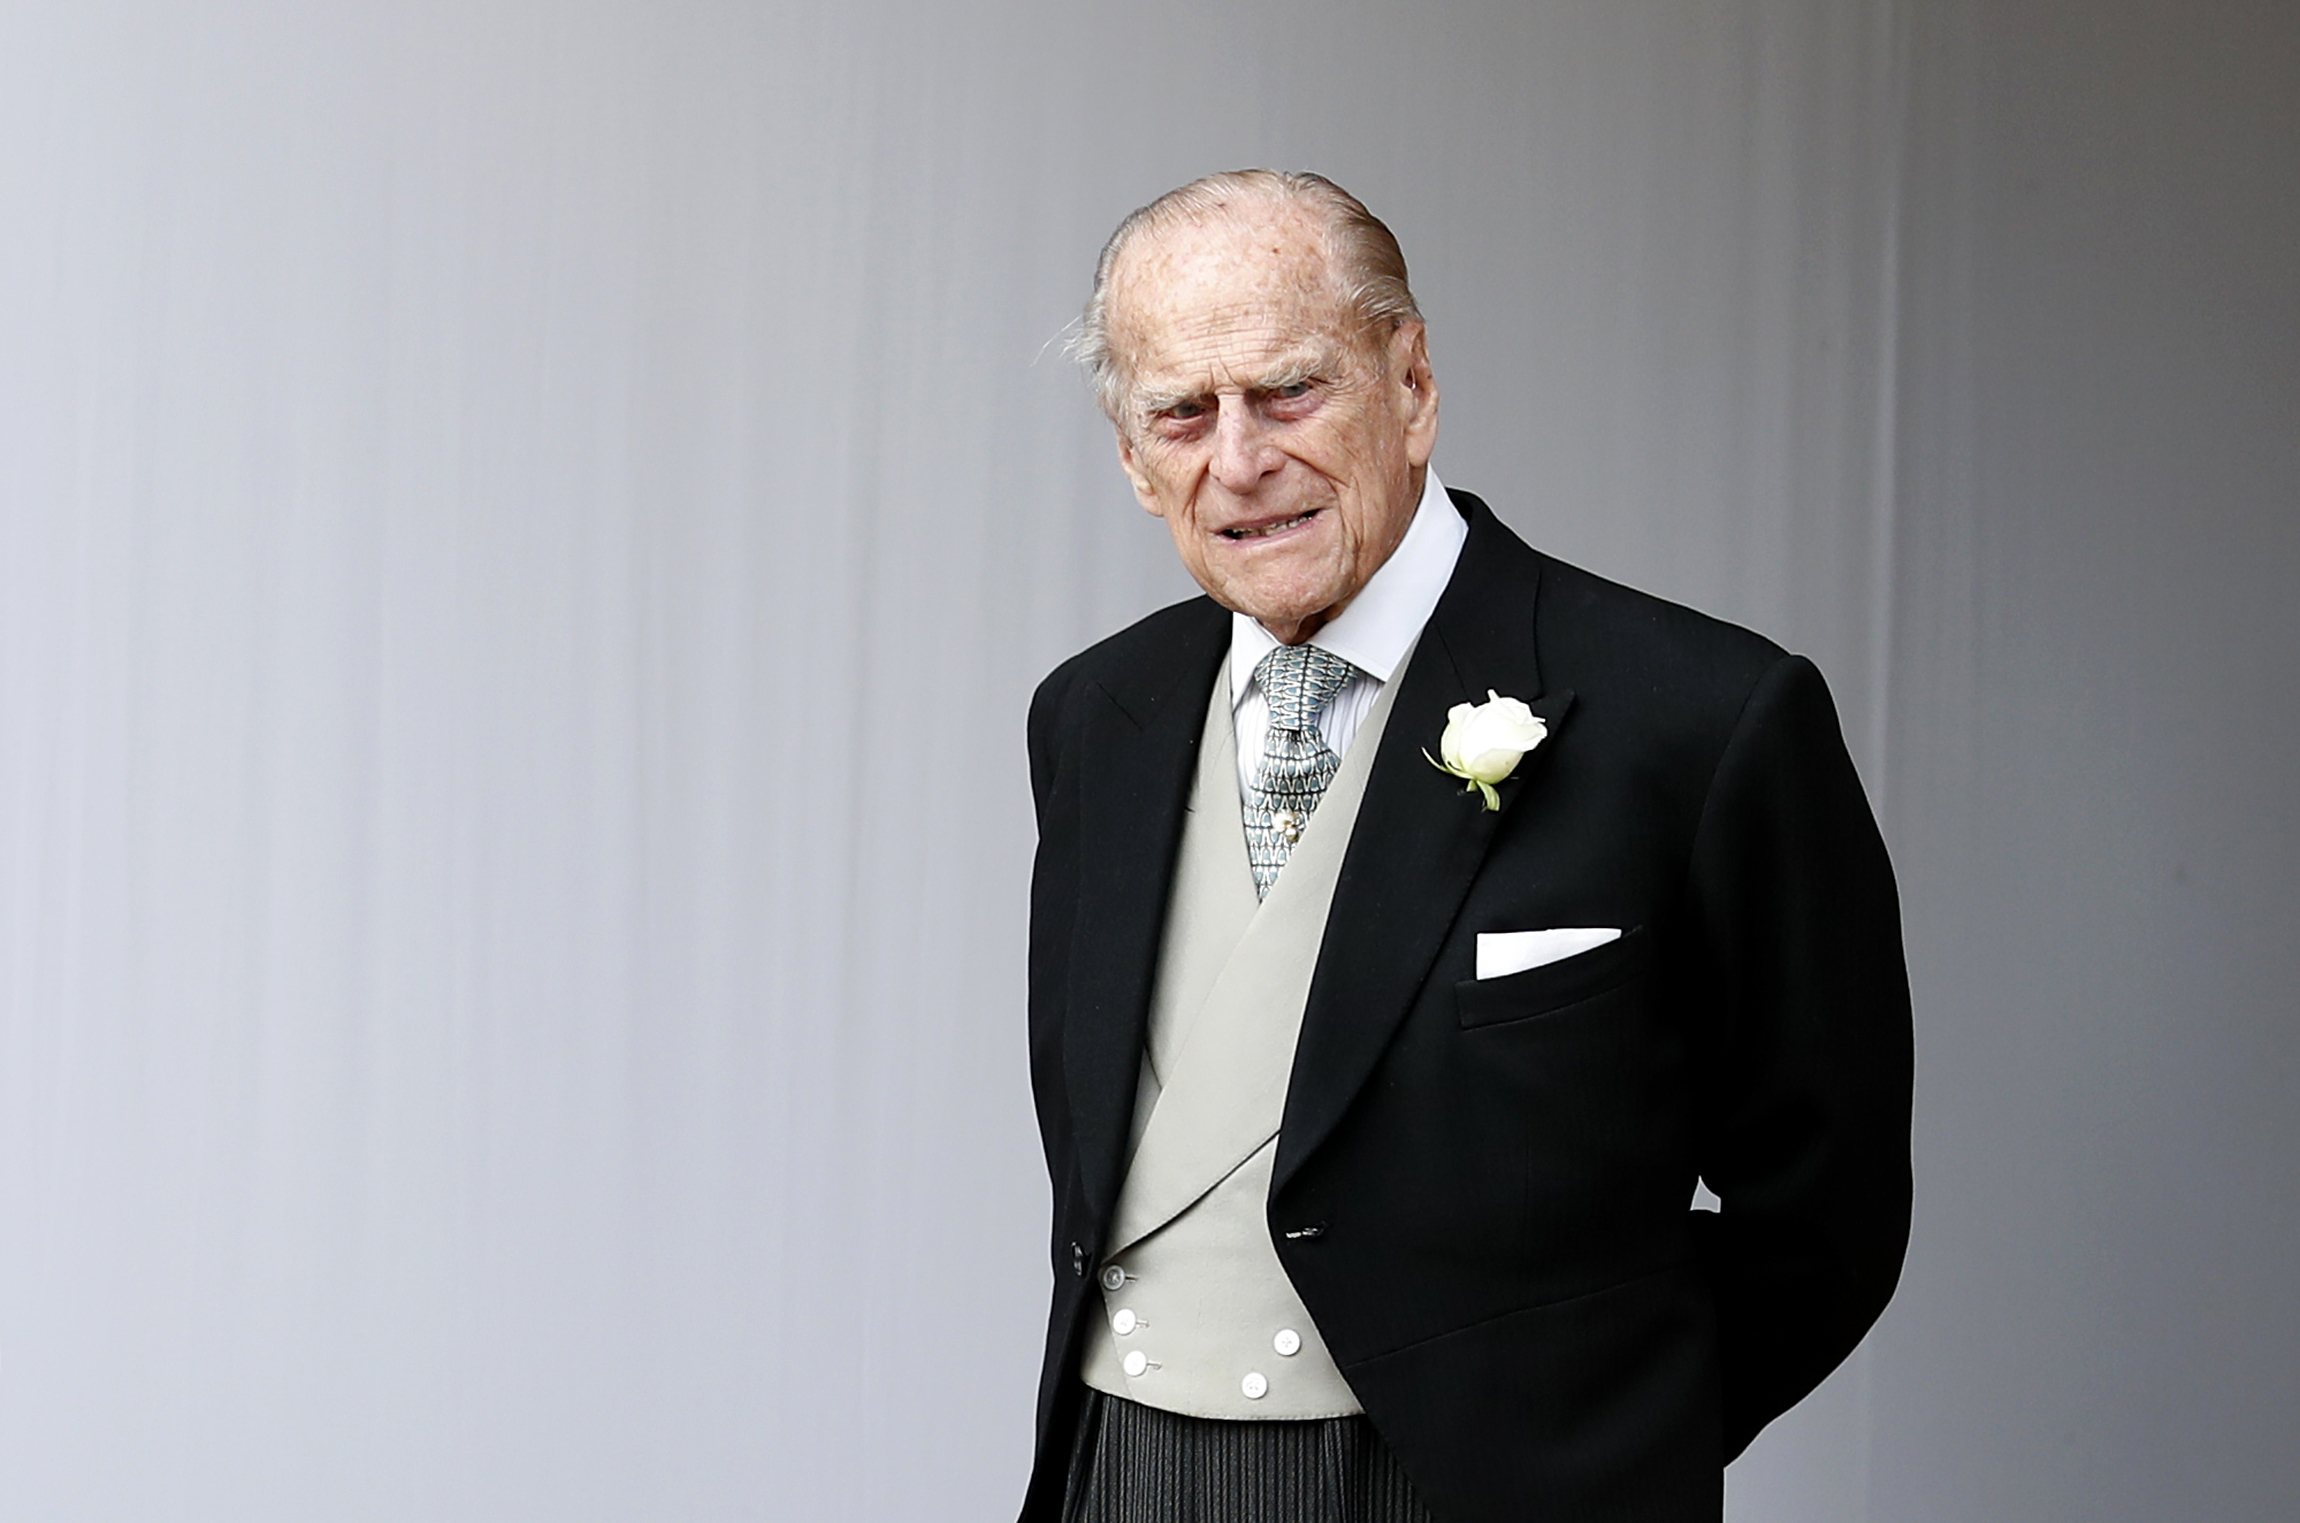 PHOTO: Prince Philip waits for the bridal procession following the wedding of Princess Eugenie of York and Jack Brooksbank in St George's Chapel, Windsor Castle, near London, Oct. 12, 2018.